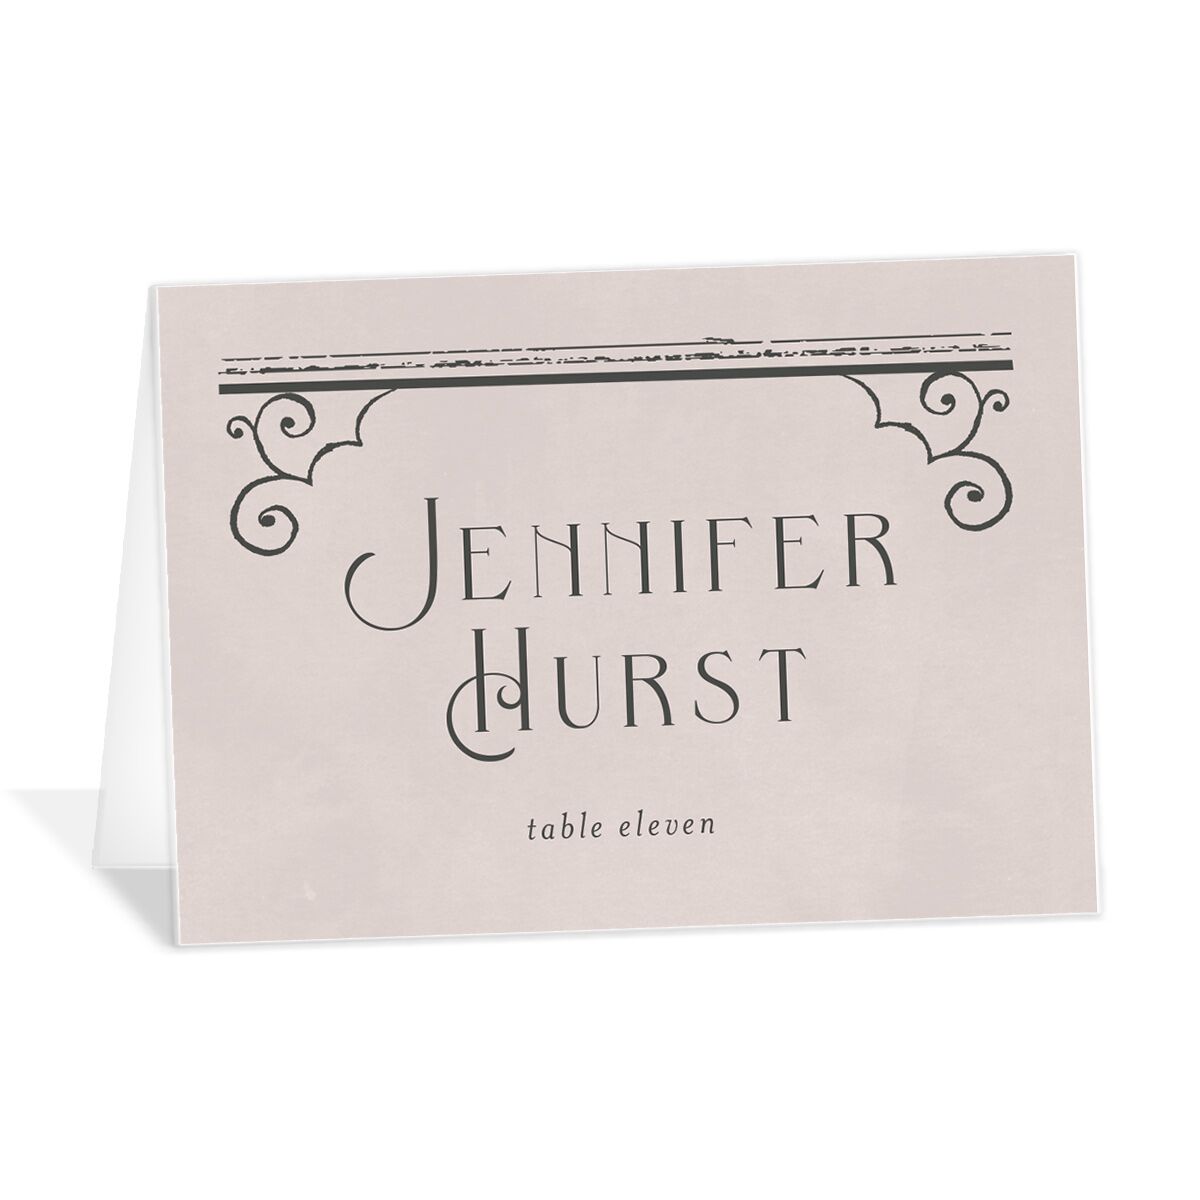  Gothic Gate Place Cards